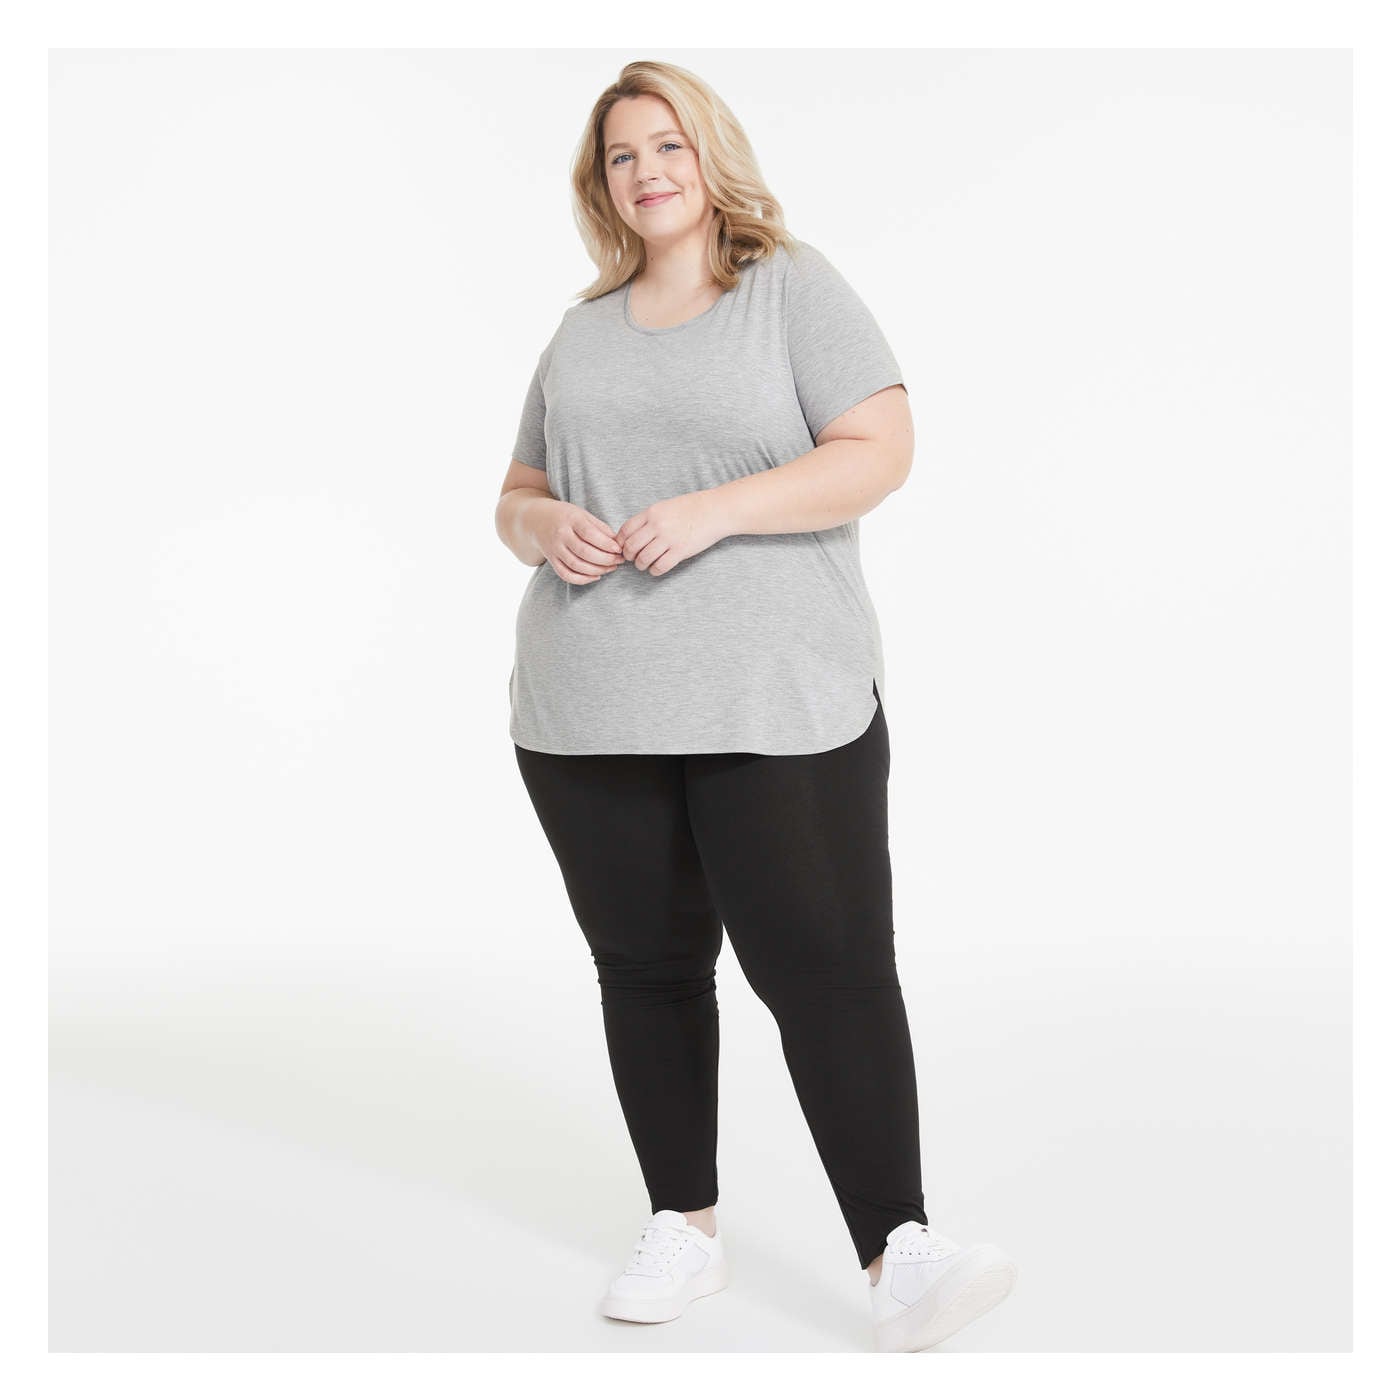 Women+ Relaxed-Fit Tee in Light Grey Mix from Joe Fresh